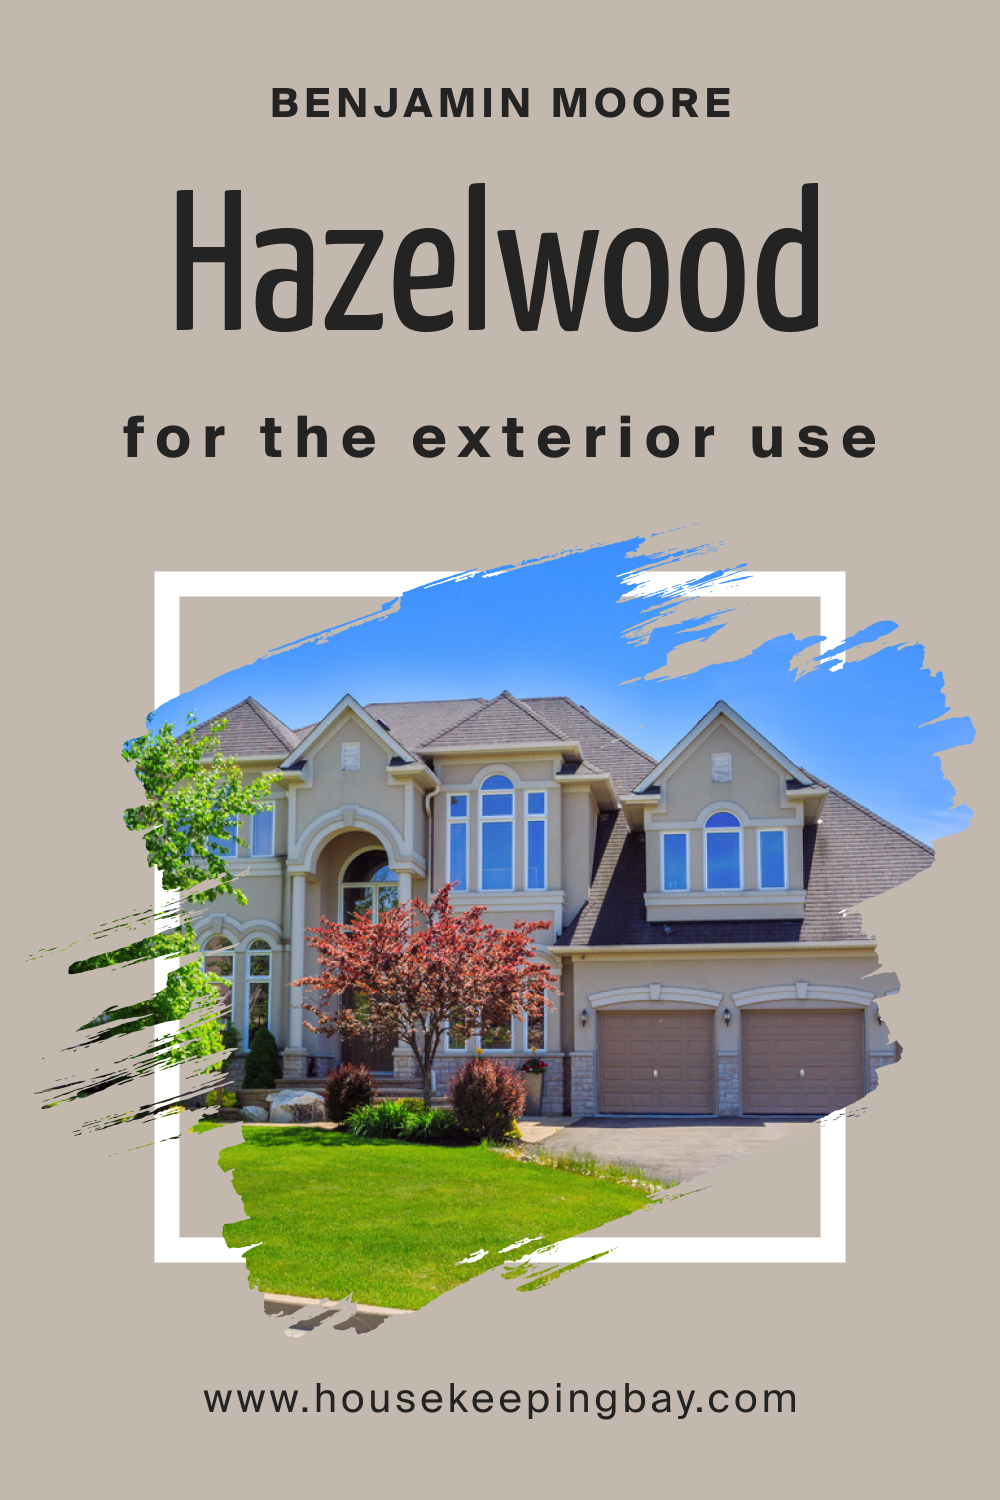 Benjamin Moore. BM Hazelwood 1005 for the Exterior Use